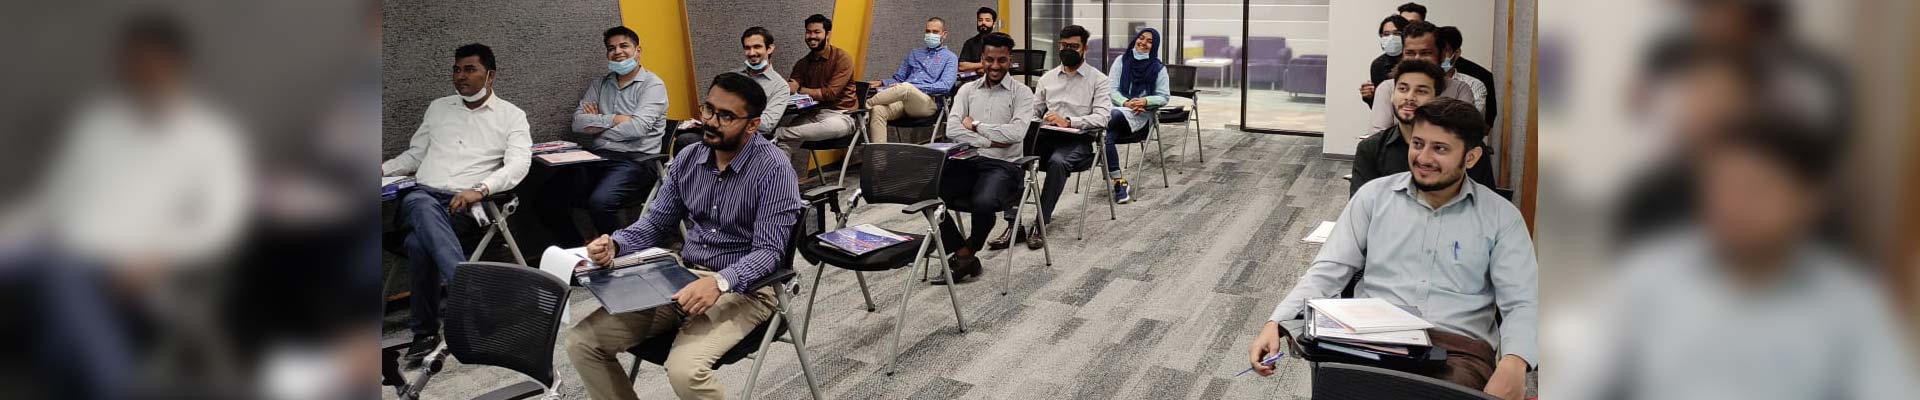 Customized Training on Successful Business Communication for Adamjee Life